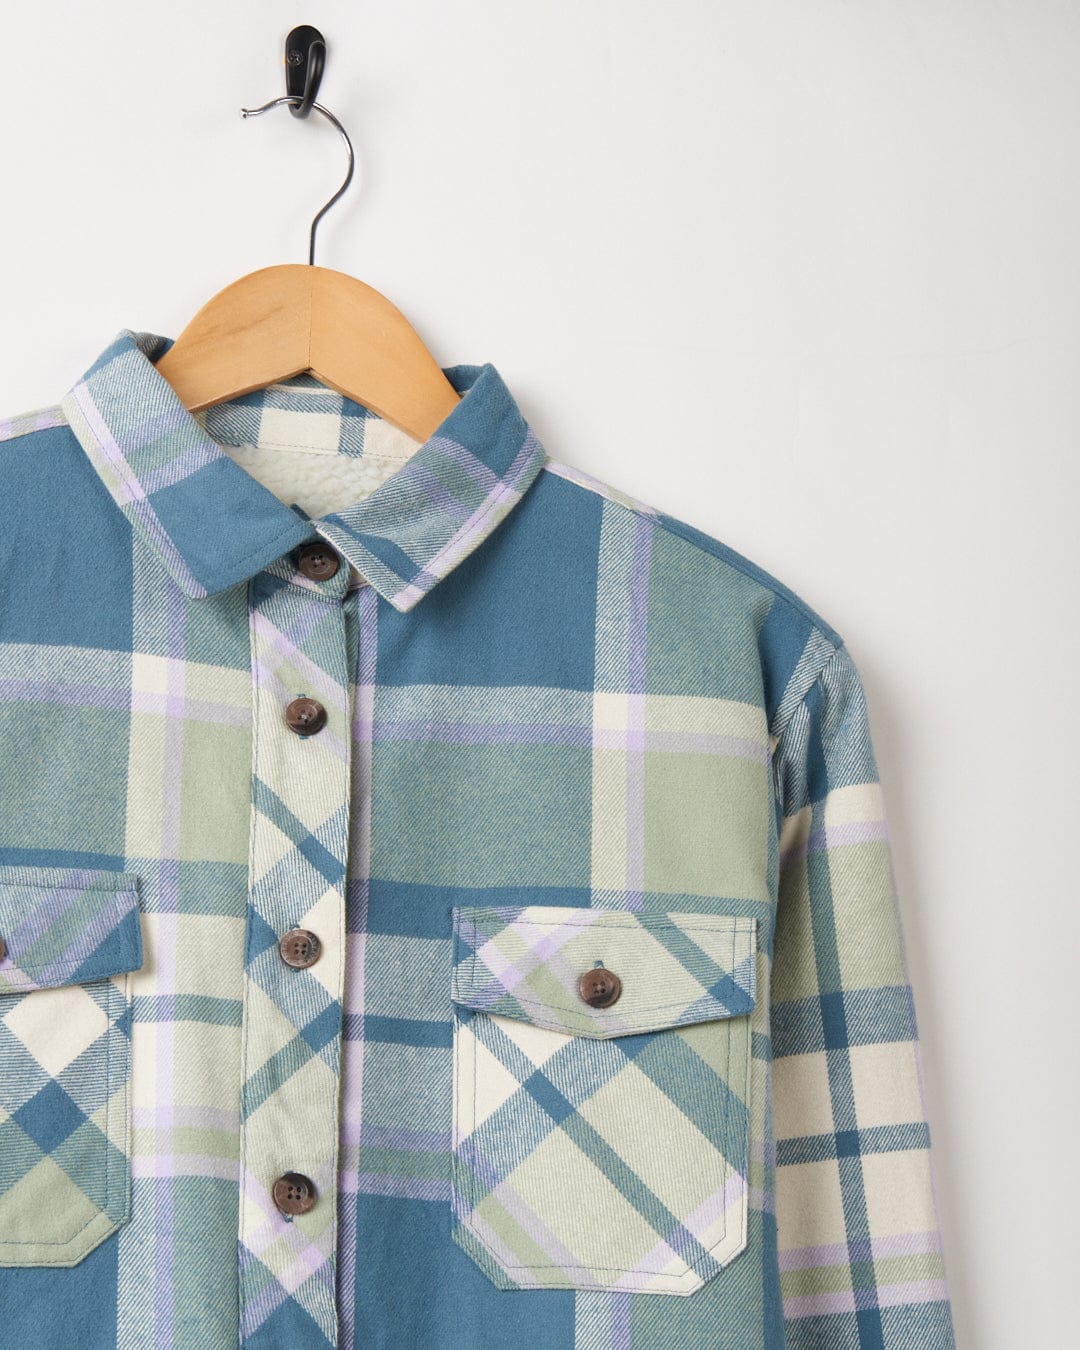 A Stella - Womens Borg Lined Long Sleeve Shirt in Blue with a blue and green plaid pattern, hanging on a hanger by Saltrock.